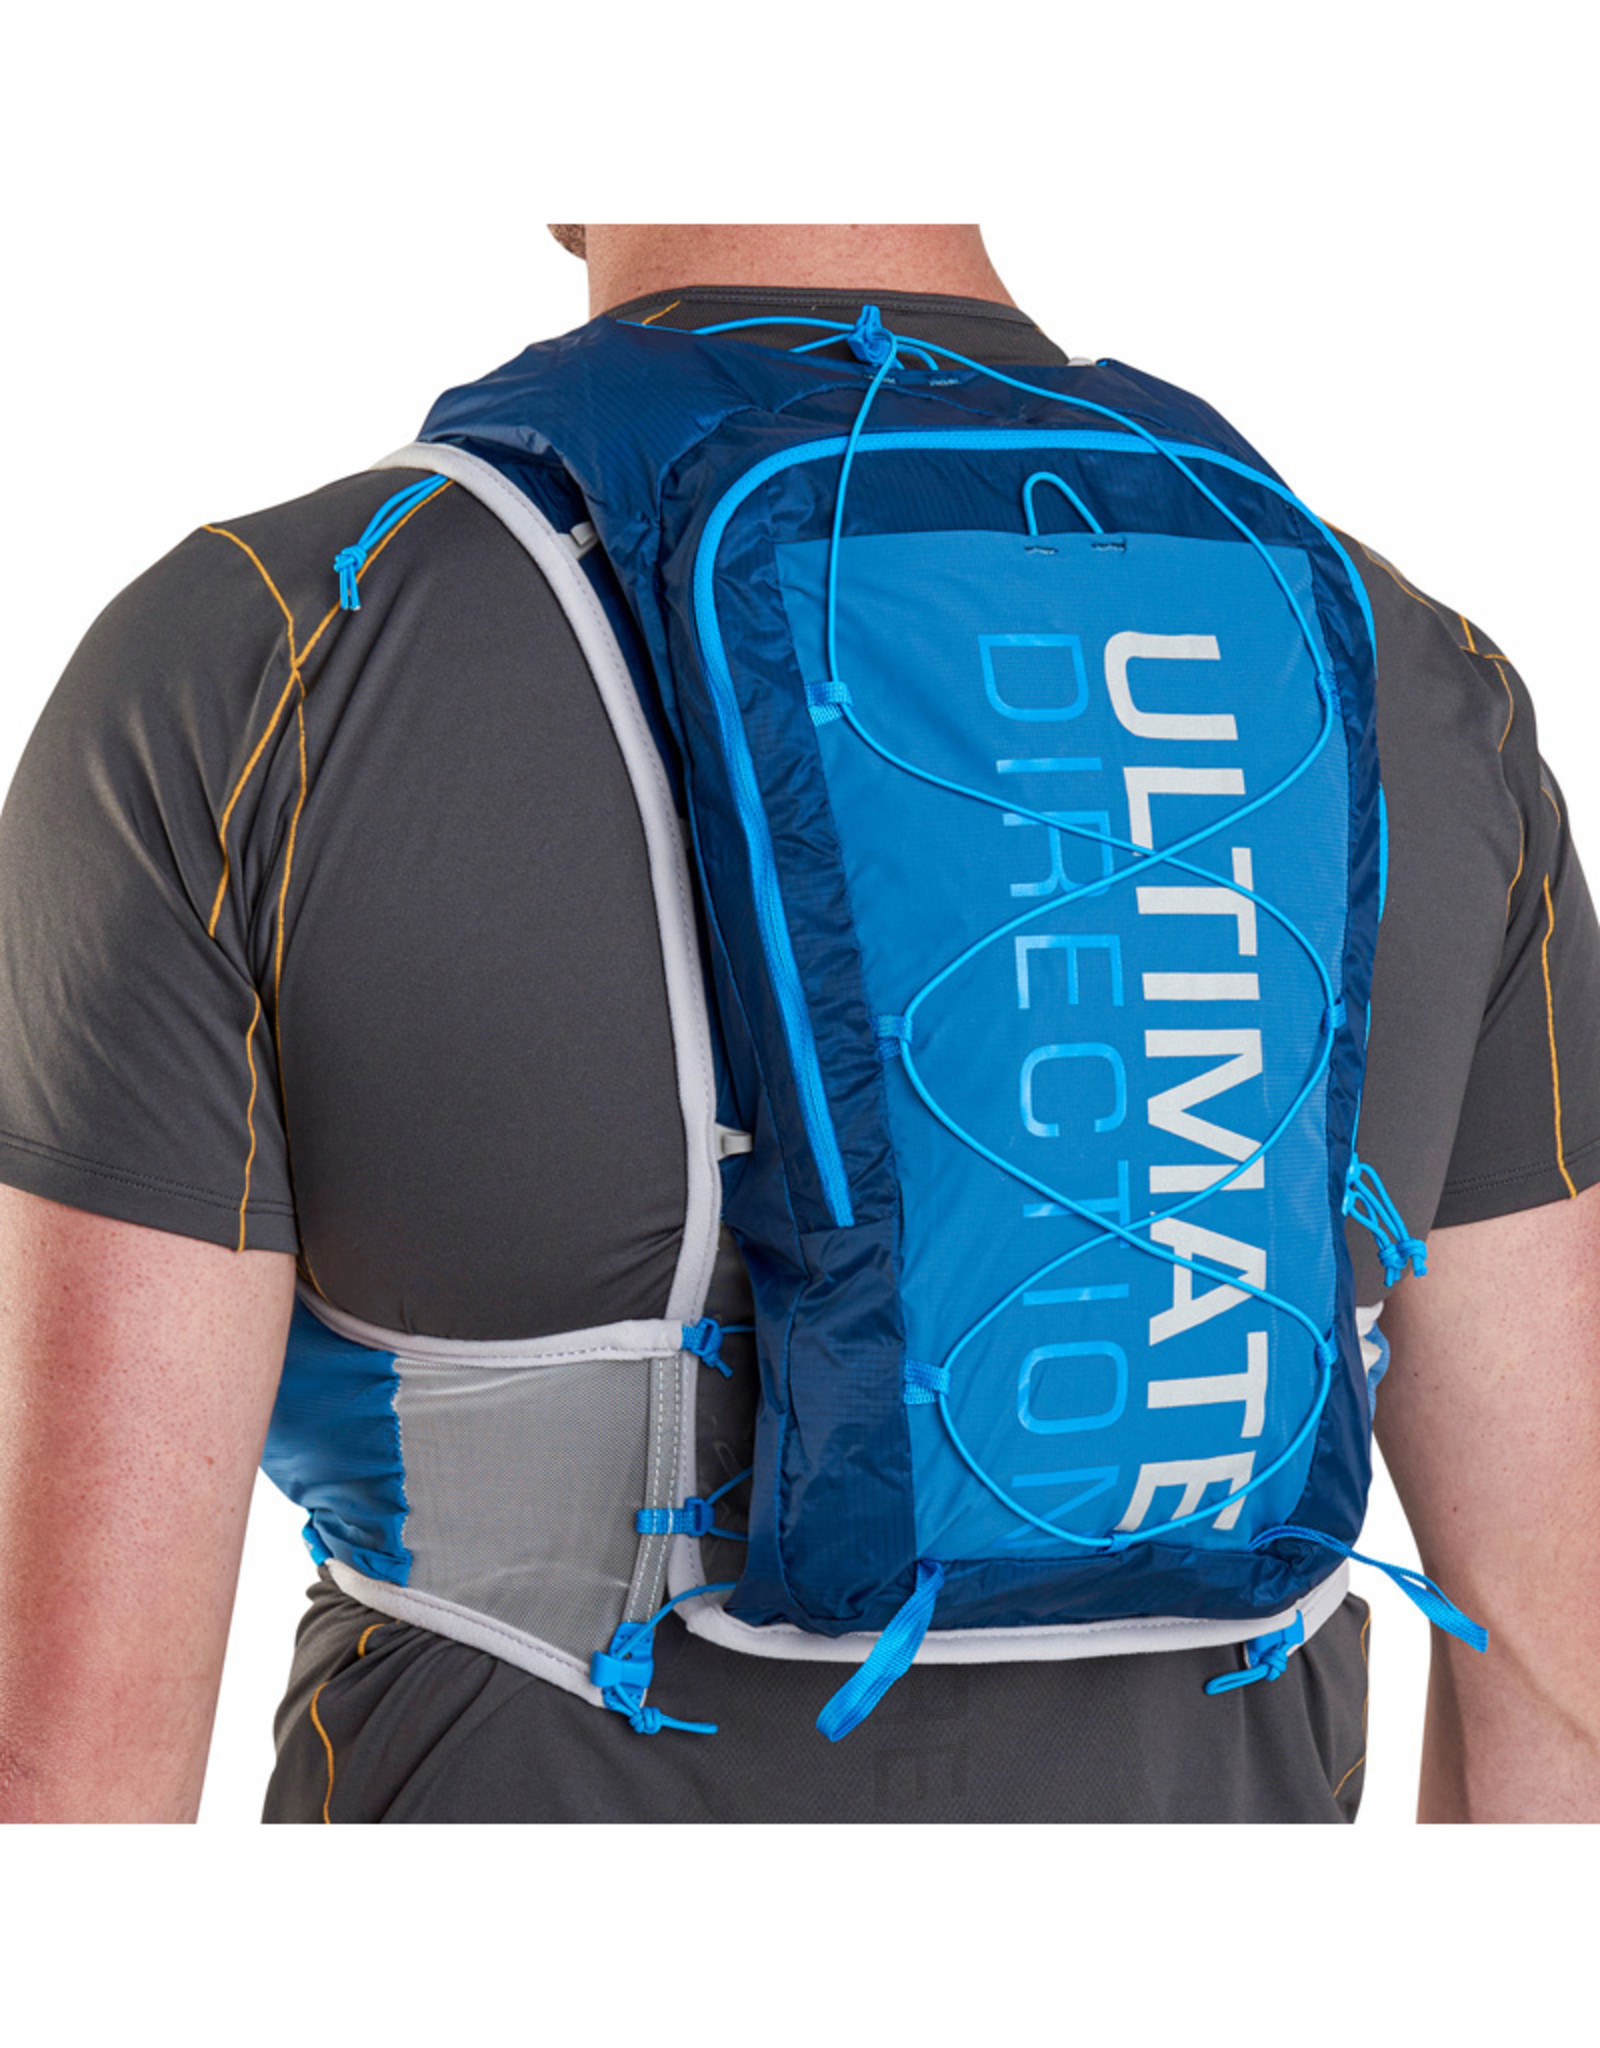 Ultimate Direction Mountain Vest 5.0 Trail Sac A Dos - Dusk